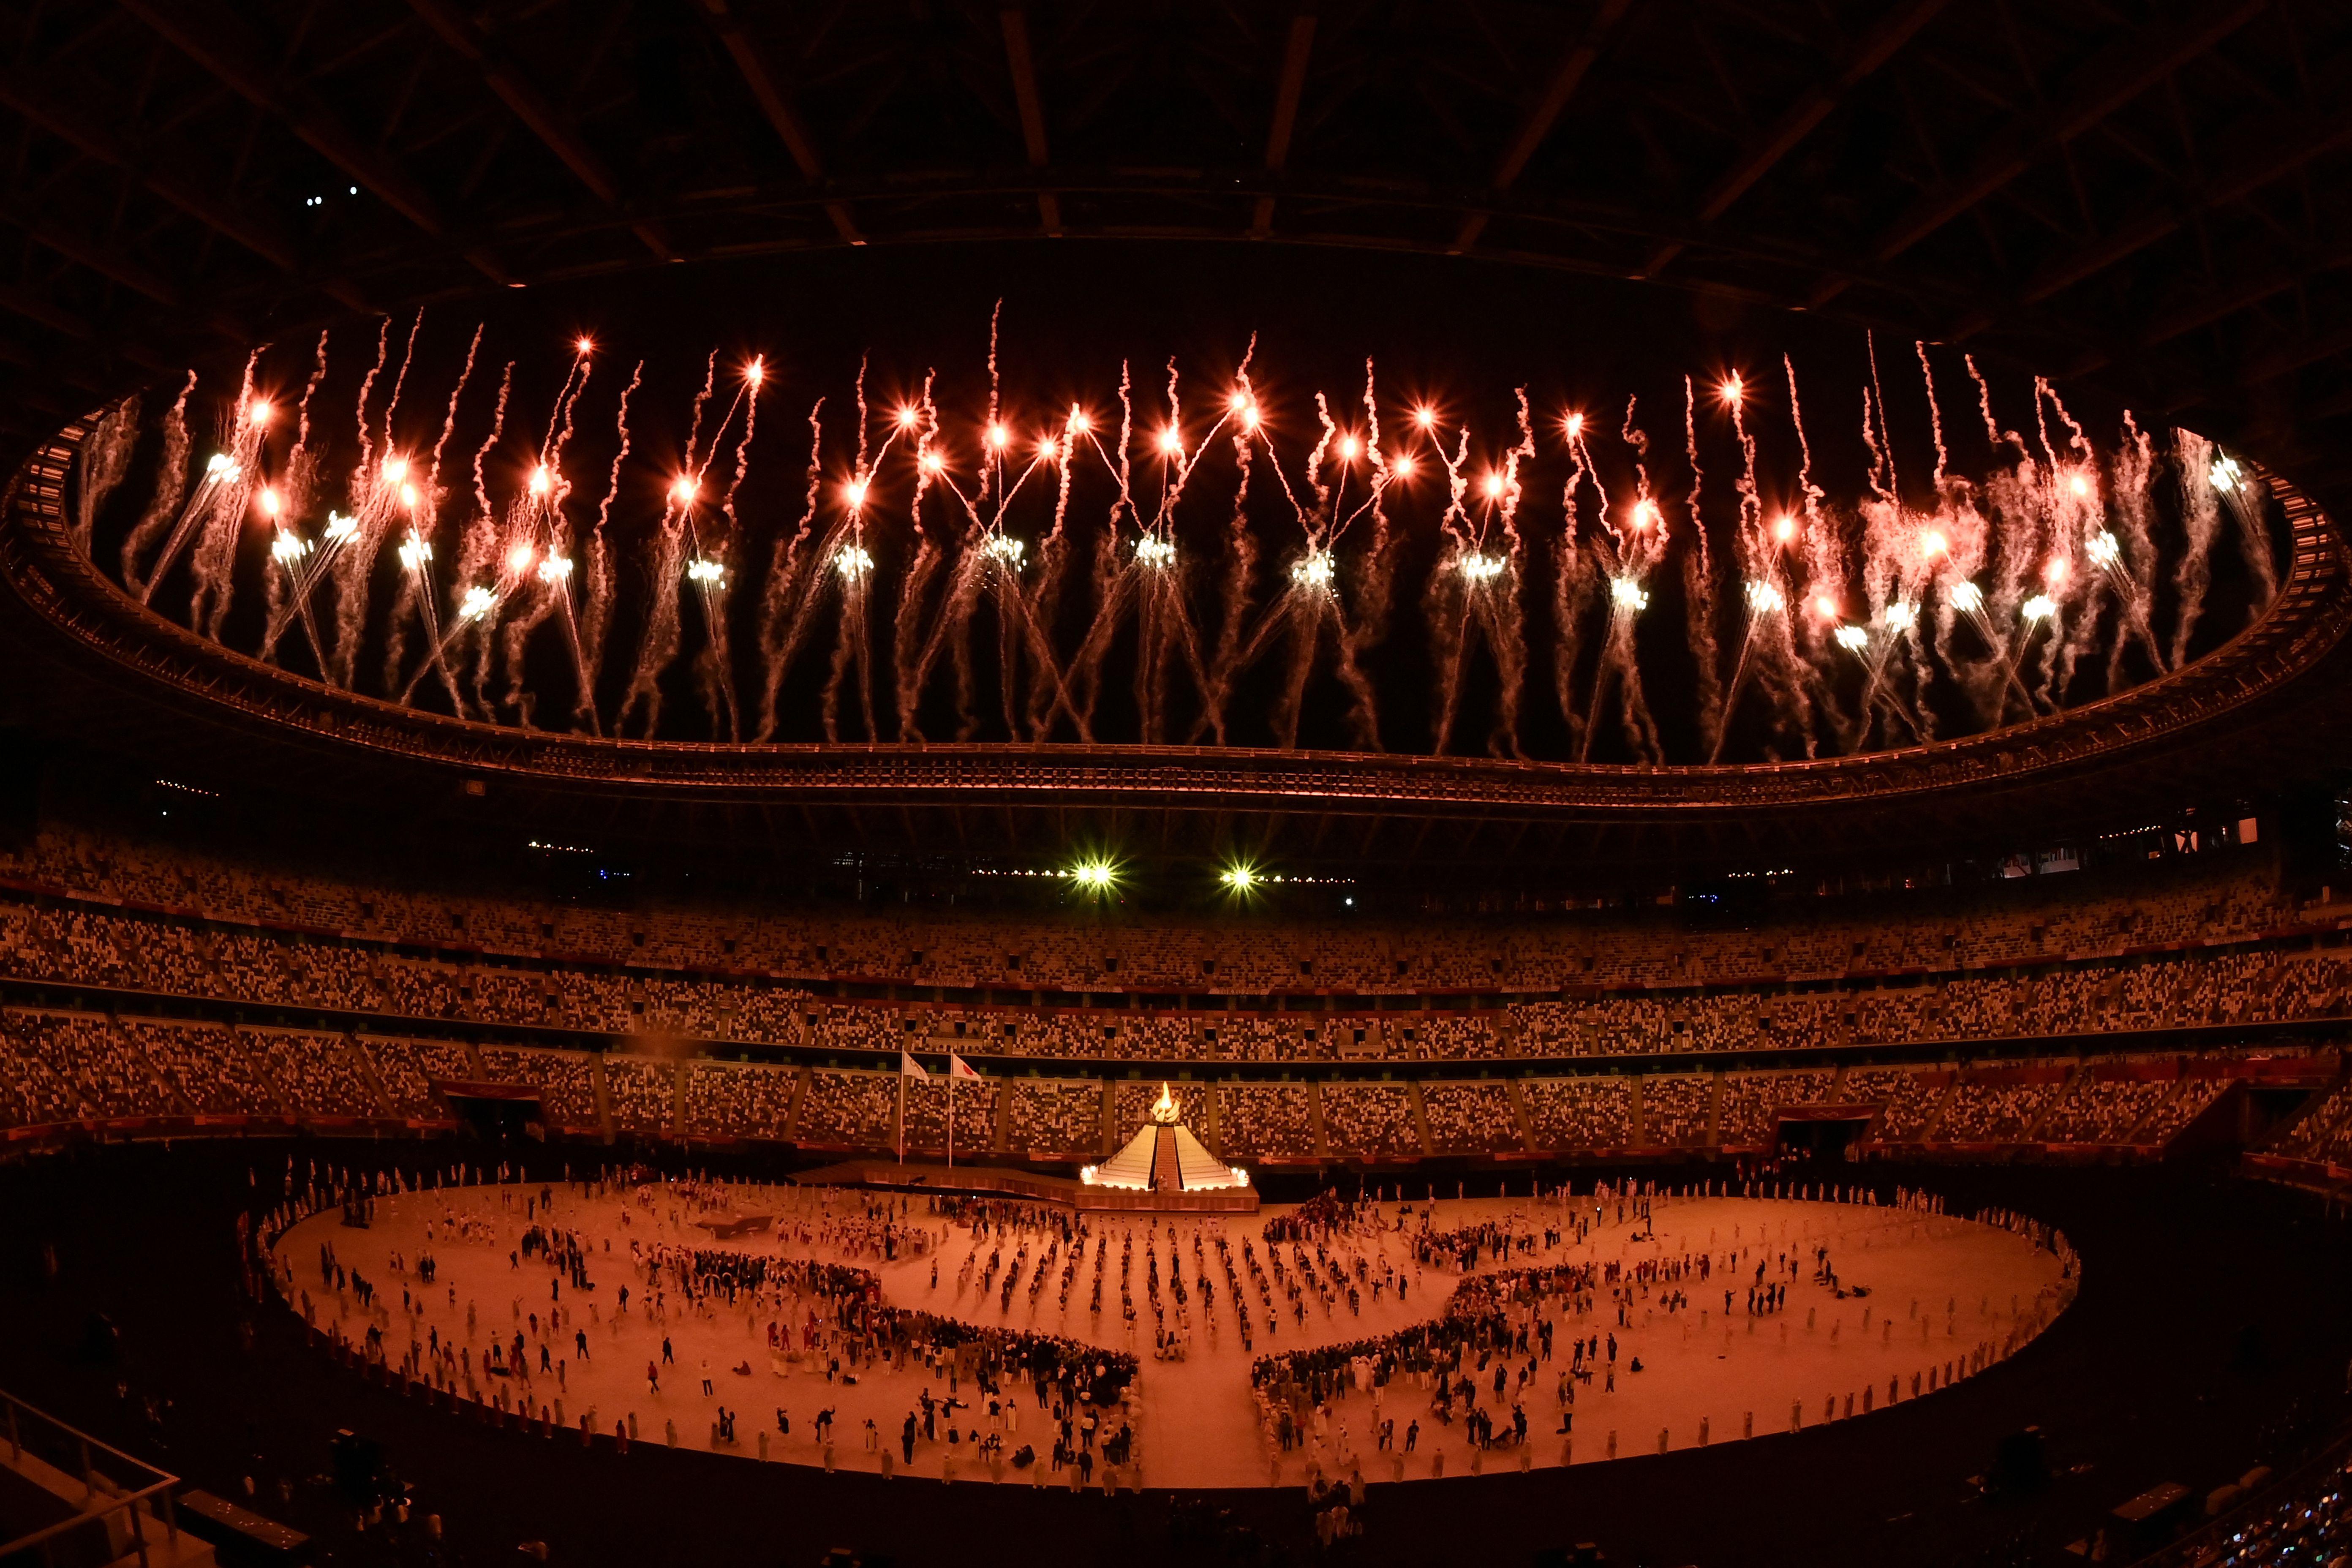 Fireworks go off around the Olympic Stadium after the lighting of the Olympic Flame during the opening ceremony of the Tokyo 2020 Olympic Games, in Tokyo, on July 23, 2021. (Photo by Jewel SAMAD / AFP) (Photo by JEWEL SAMAD/AFP via Getty Images)